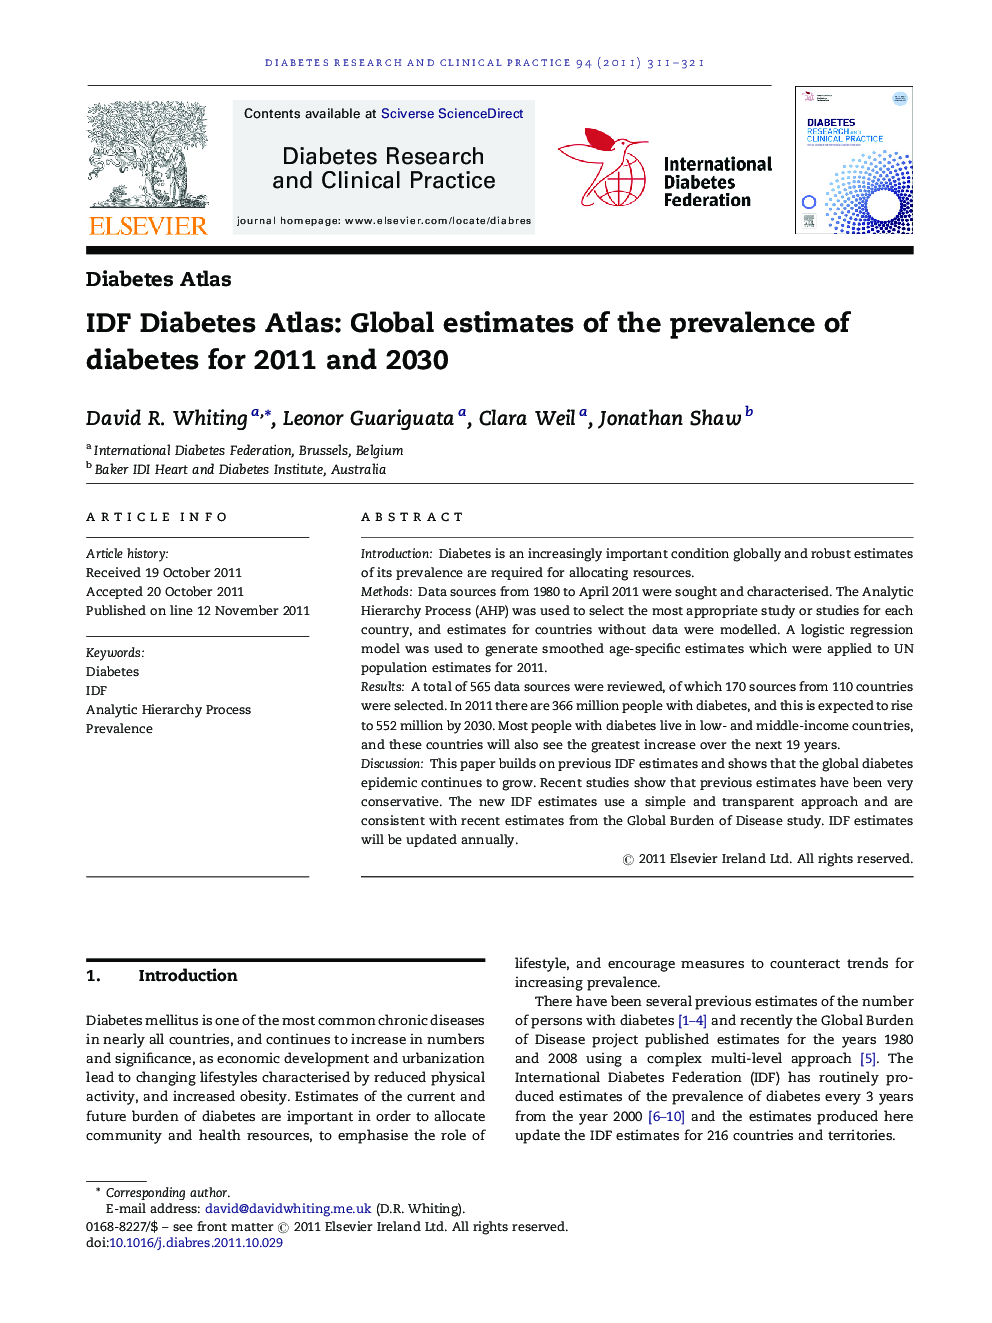 IDF Diabetes Atlas: Global estimates of the prevalence of diabetes for 2011 and 2030